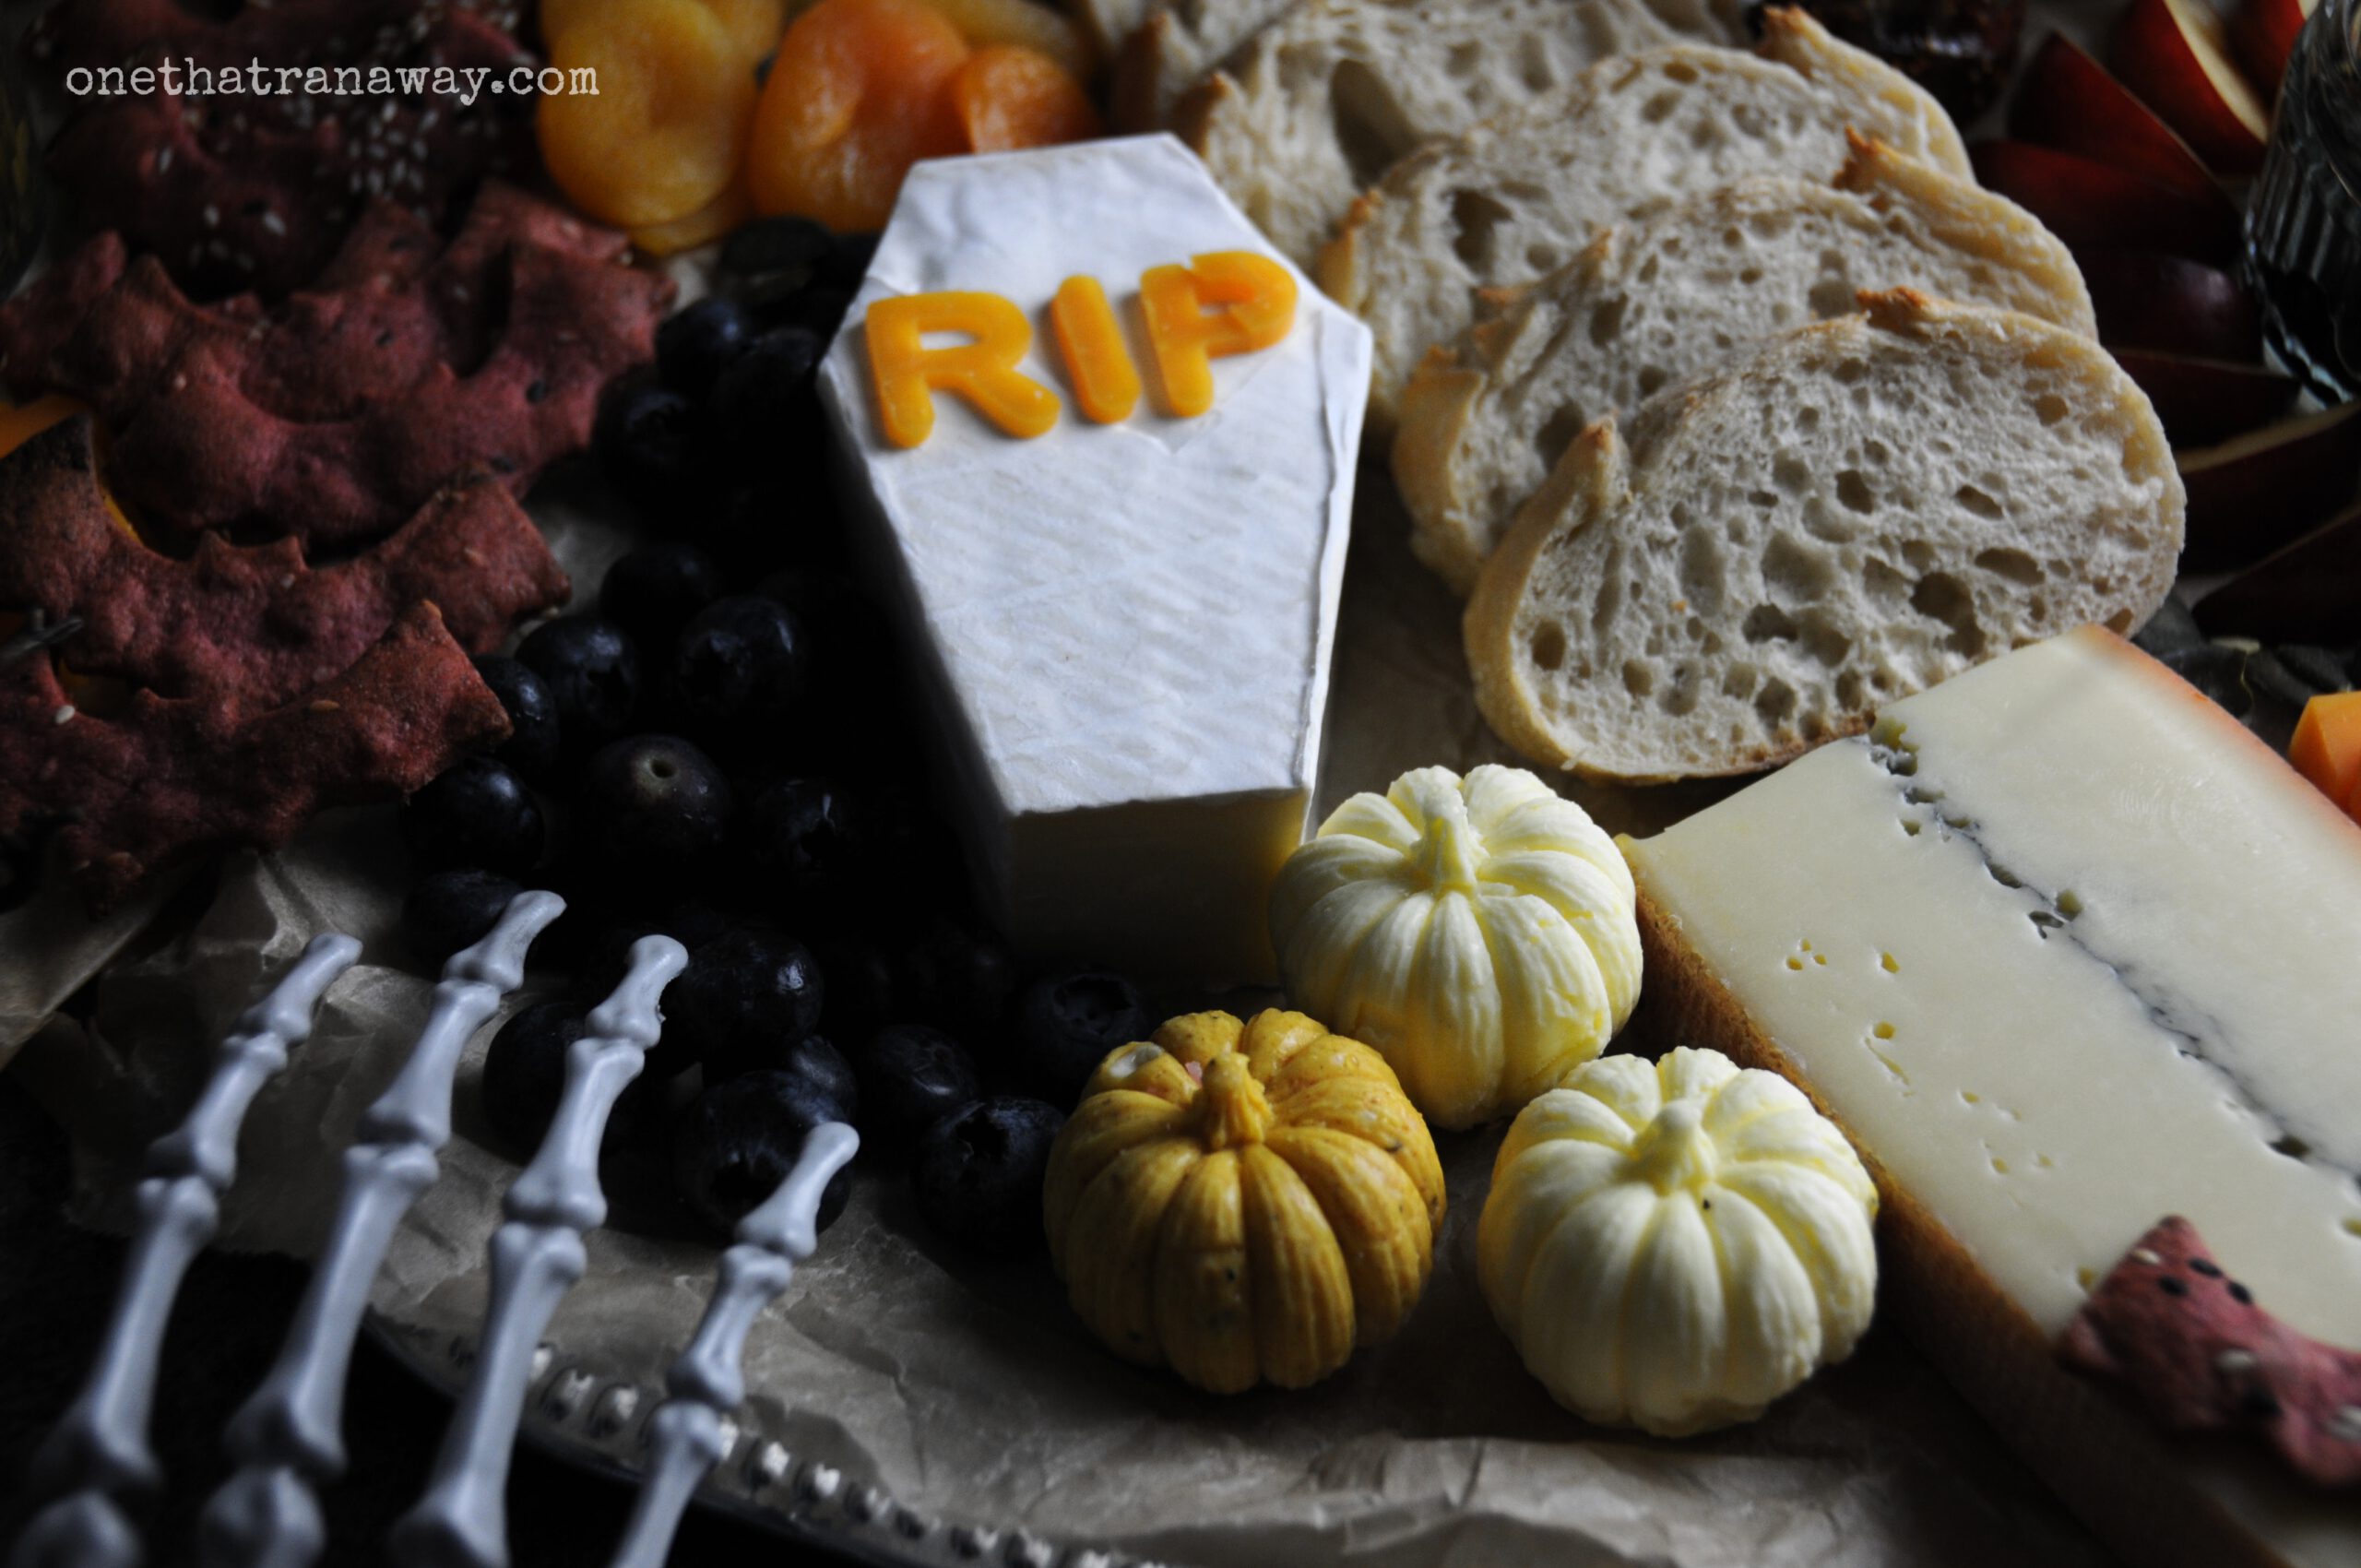 a Halloween themed cheese platter with a coffin shaped brie cheese, butter shaped like pumpkins and a fake skeleton hand